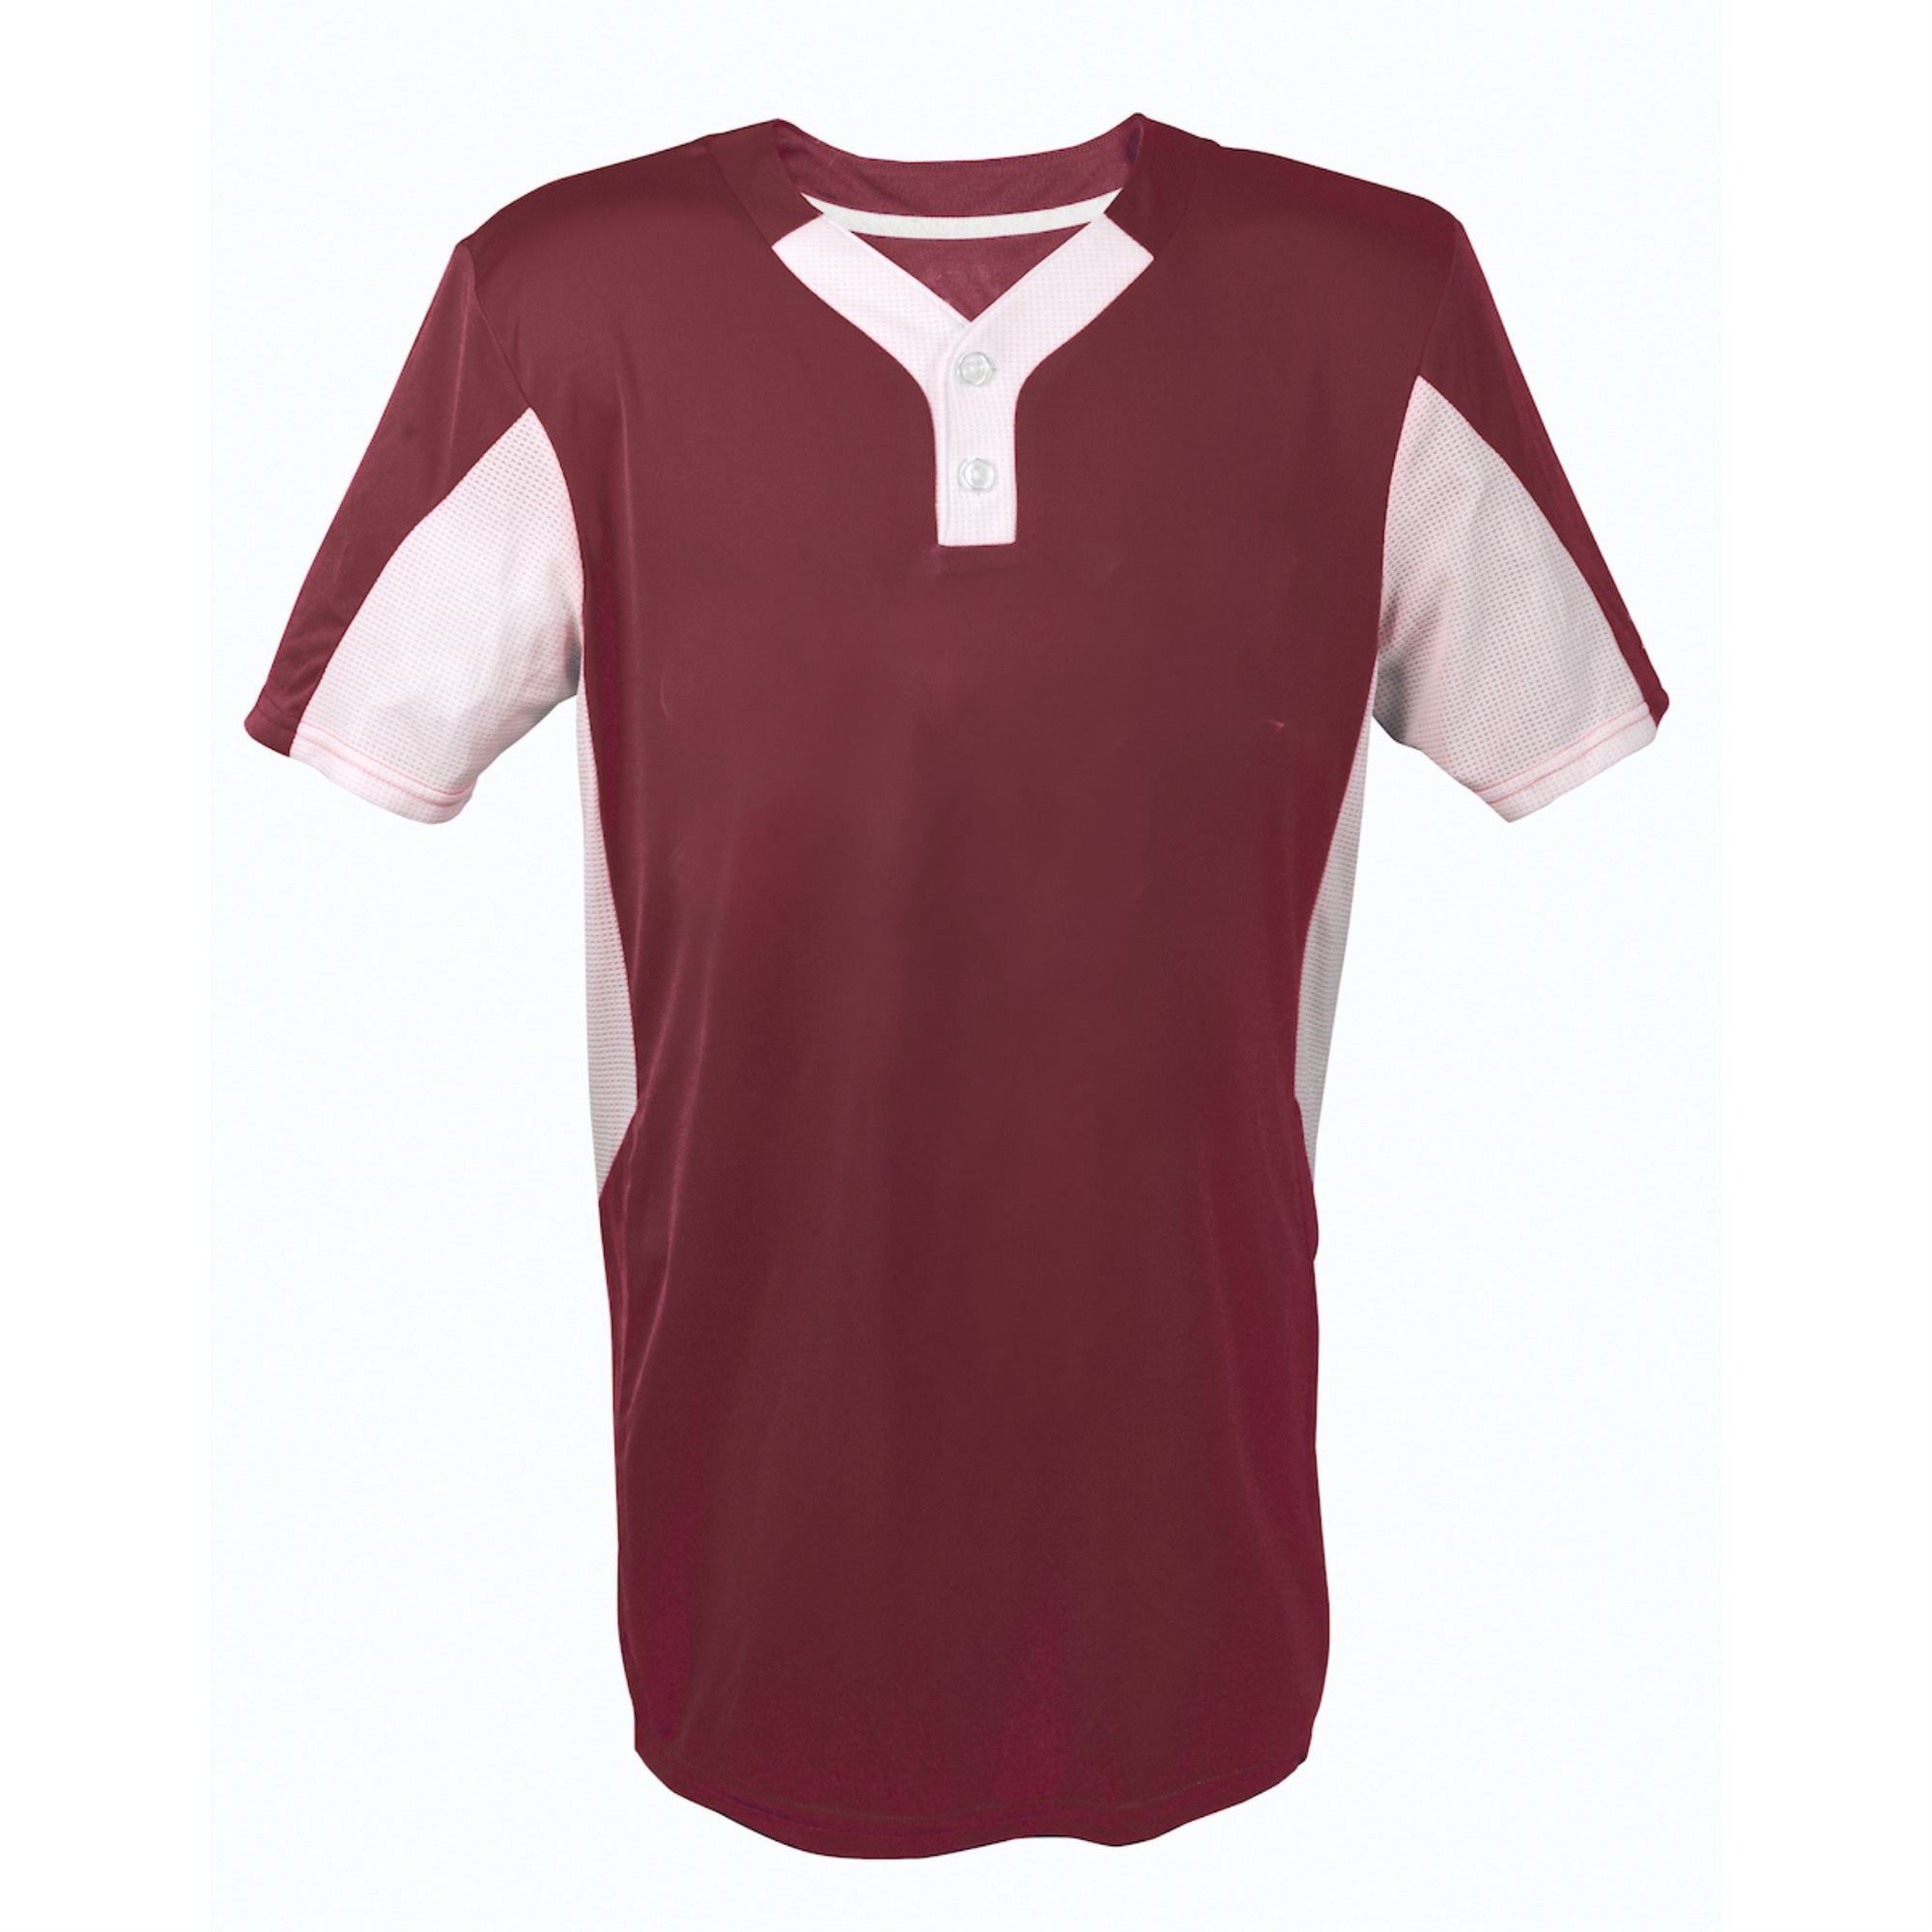 Martin Sports TWO BUTTON JERSEY-ADULT-MEDIUM-MAROON/WHITE